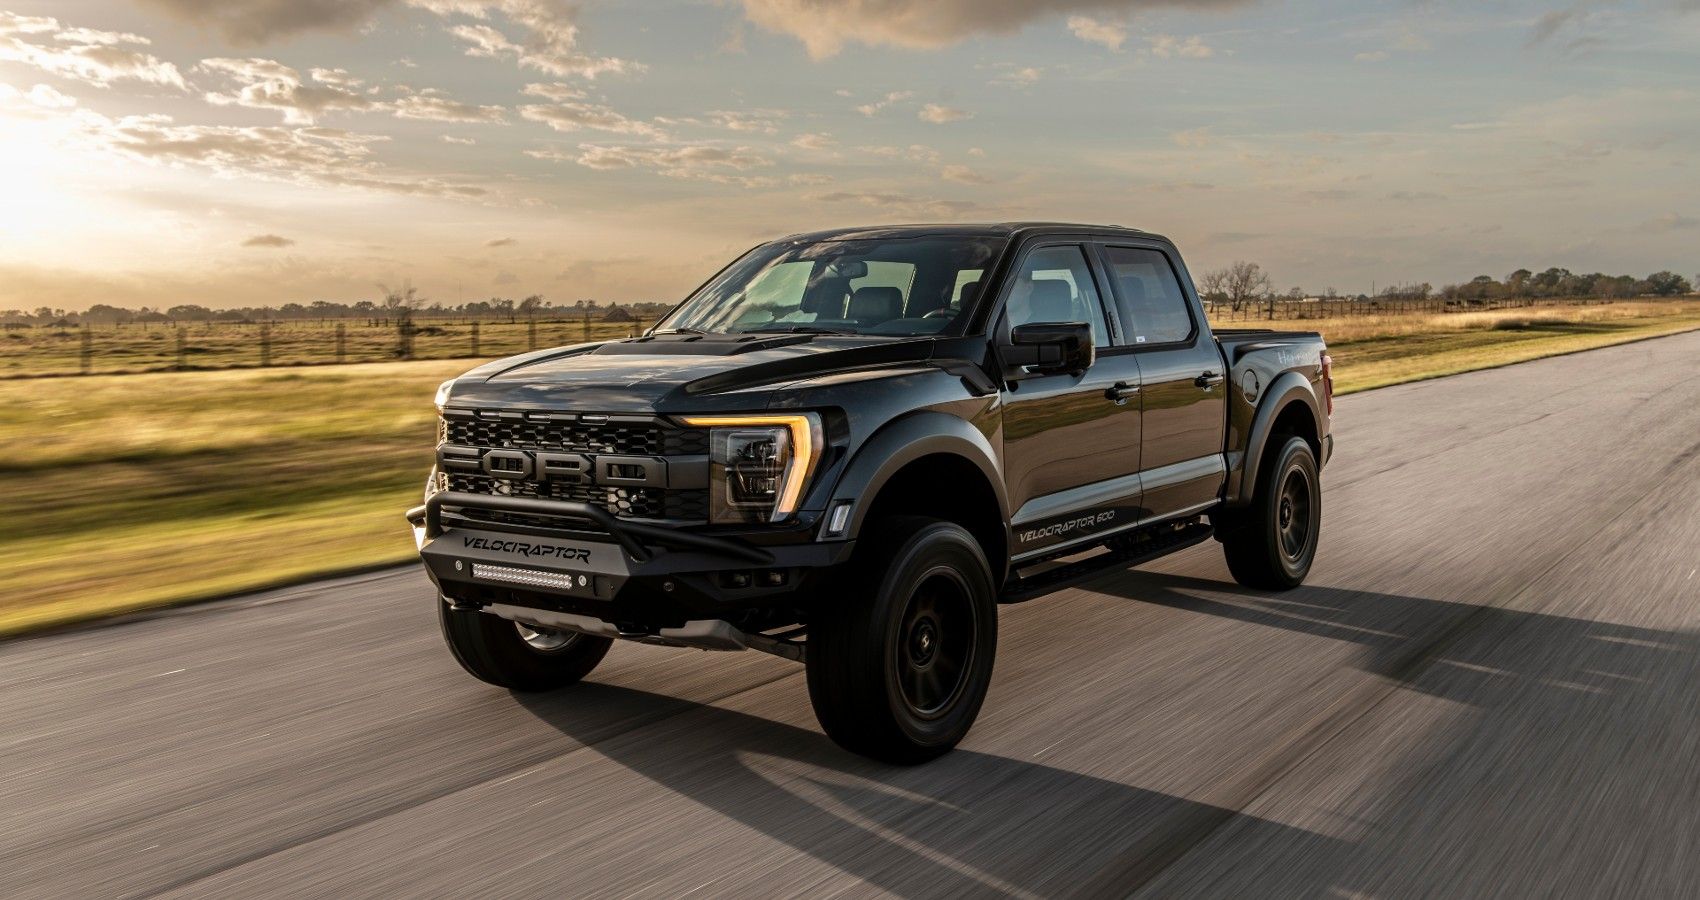 A Closer Look At The Hennessey VelociRaptor 600-HP Off-Road Beast